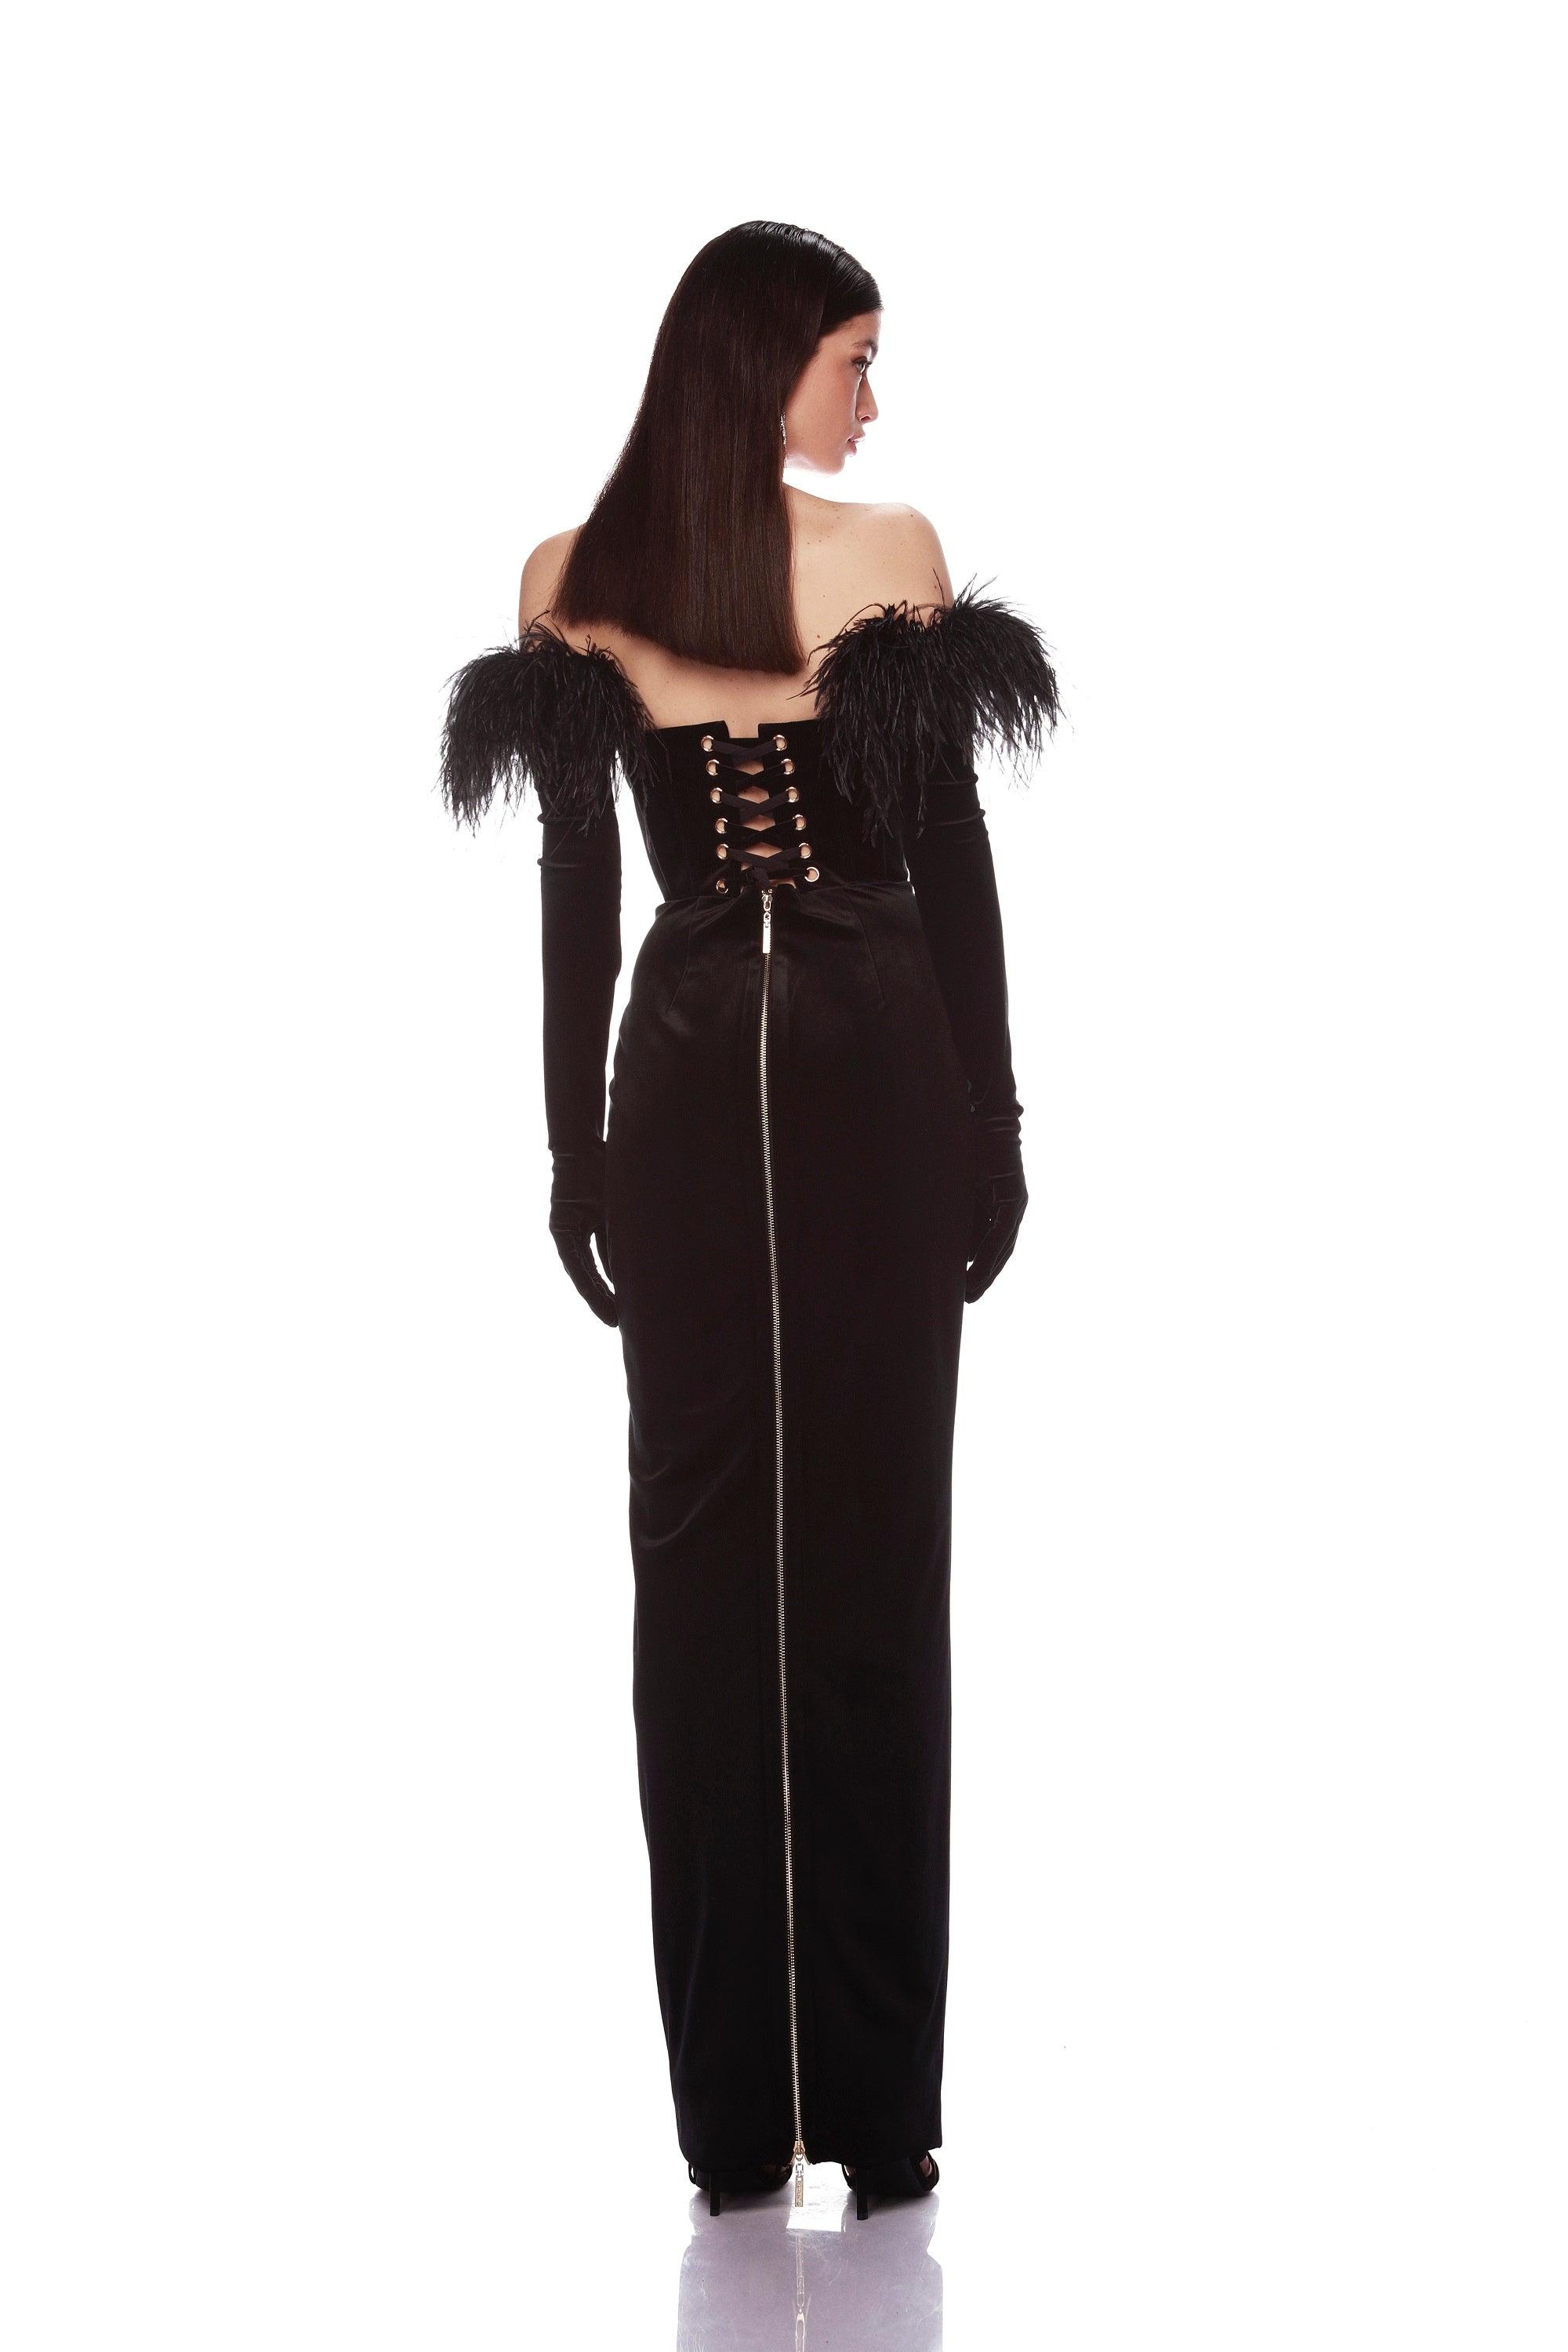 Florentina Corset Gown by Bronx and Banco for $90